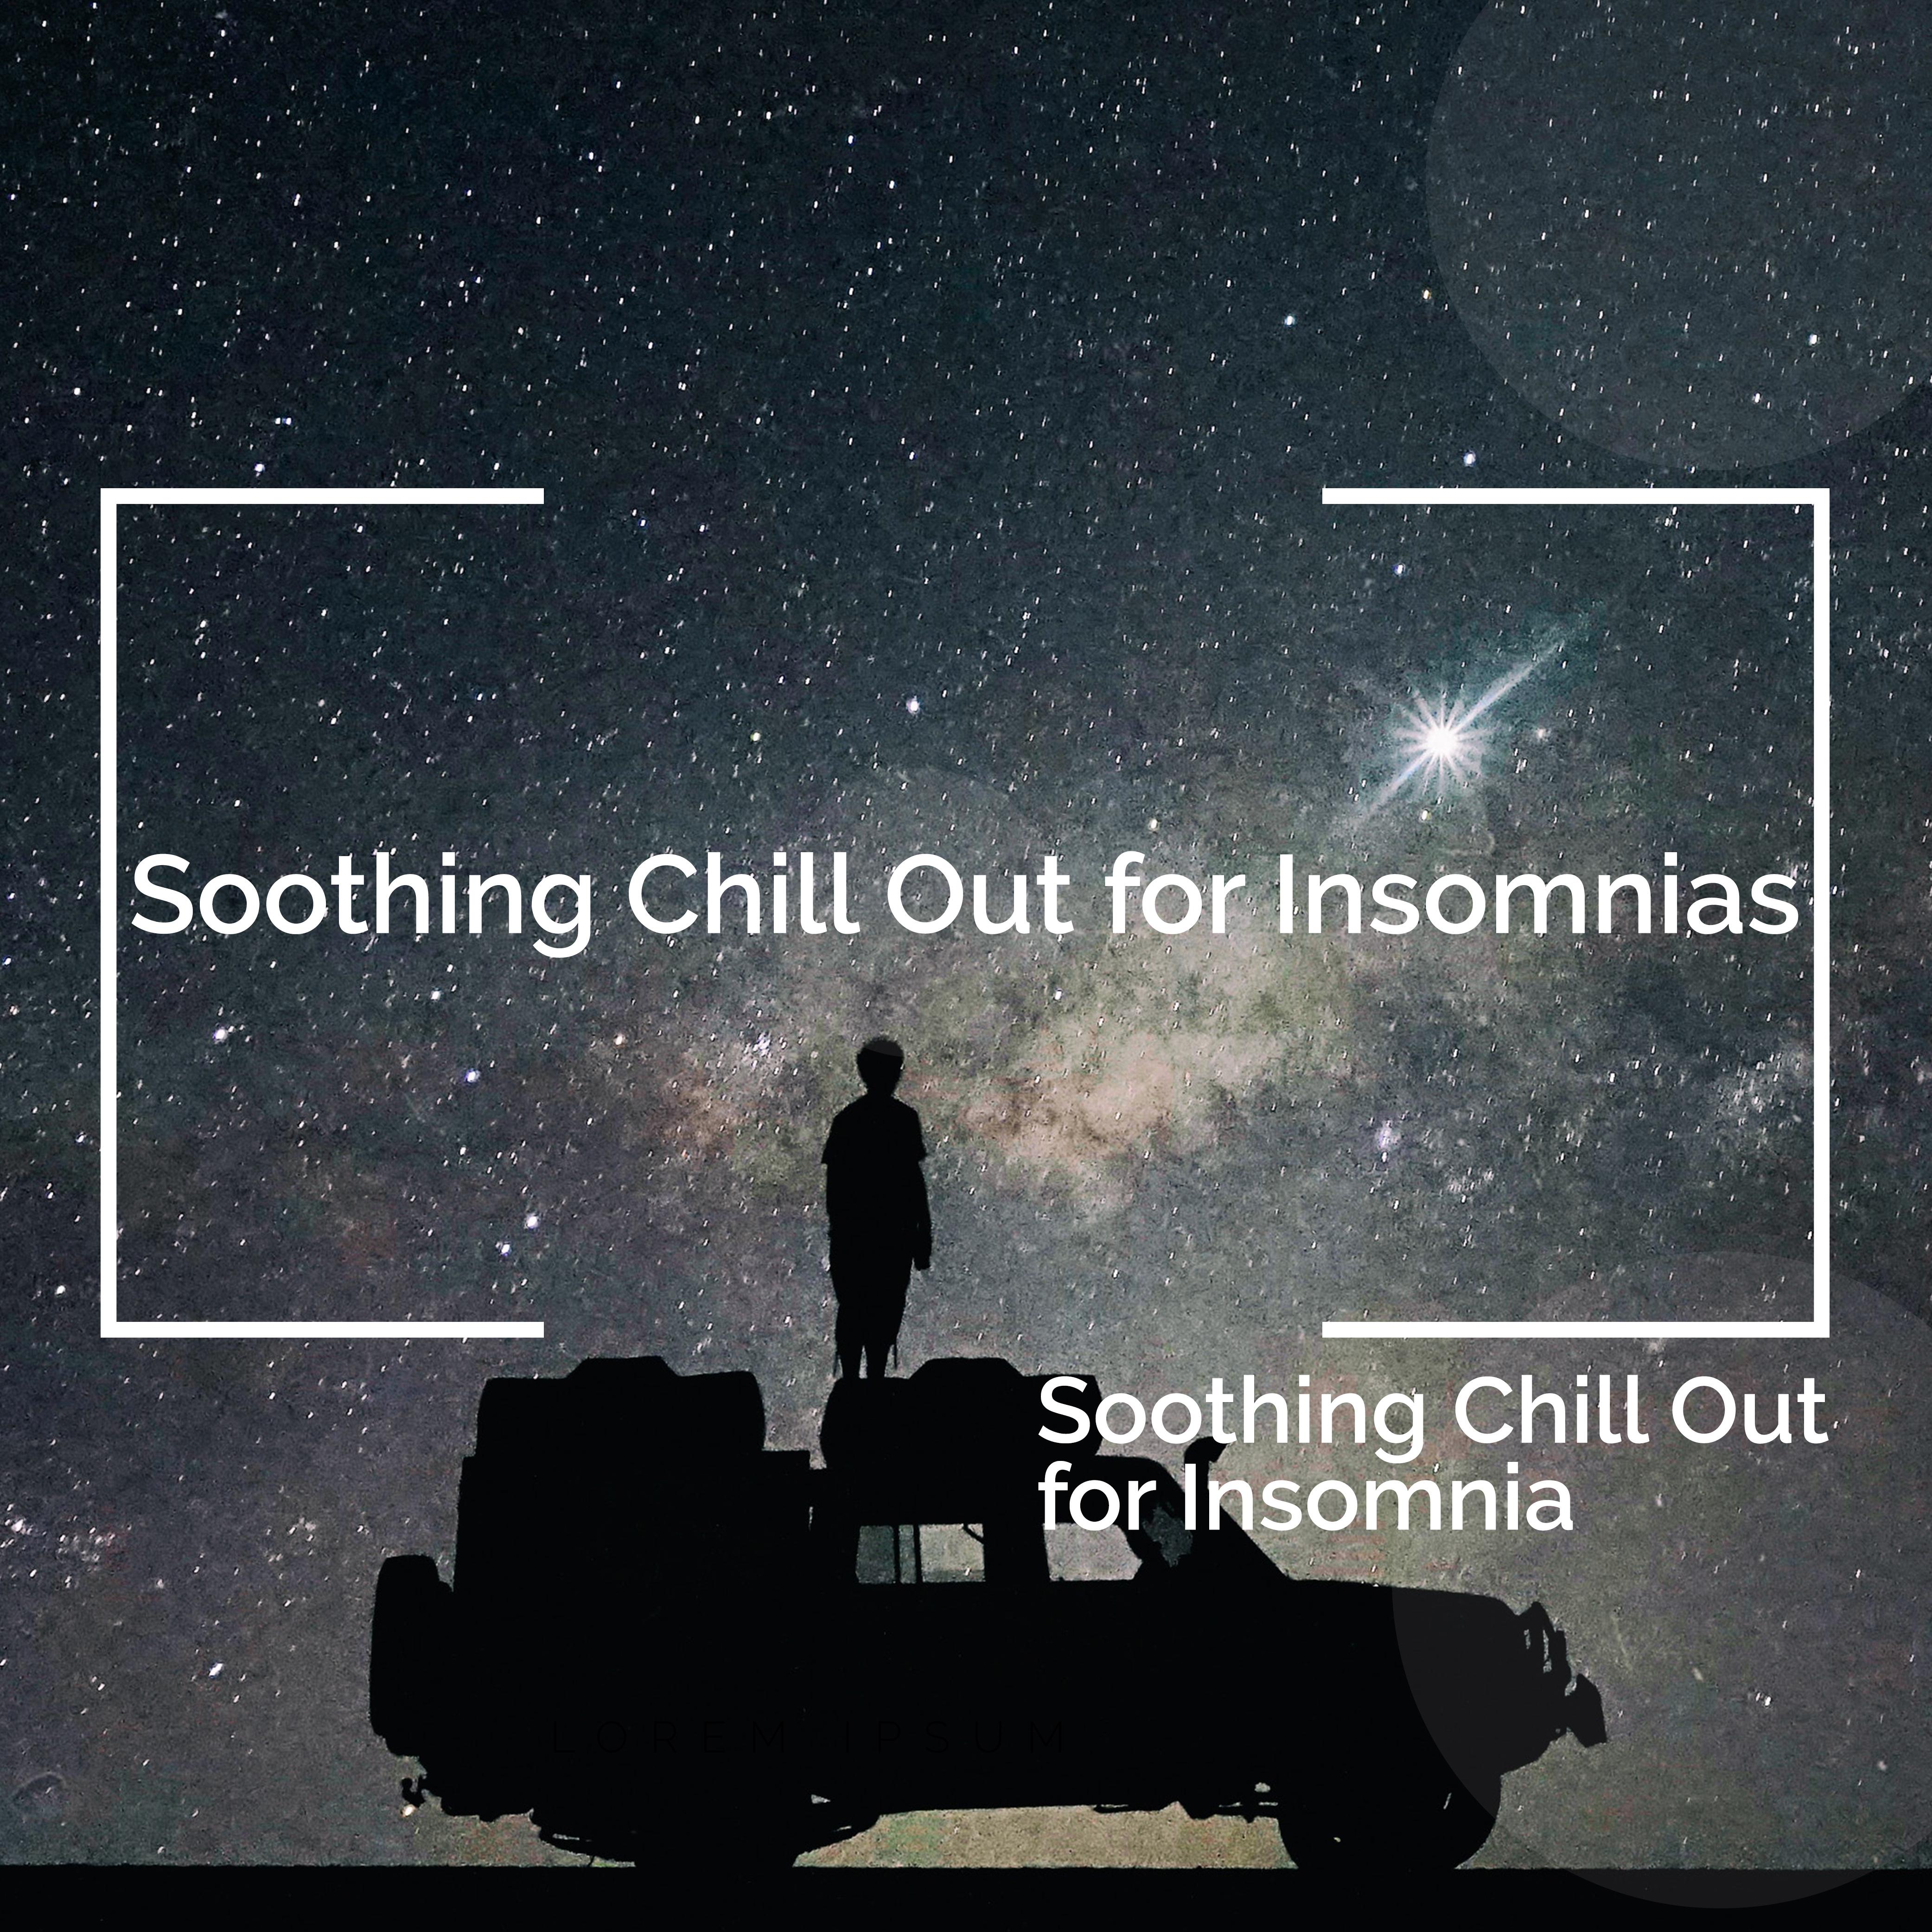 Soothing Chill Out for Insomnias